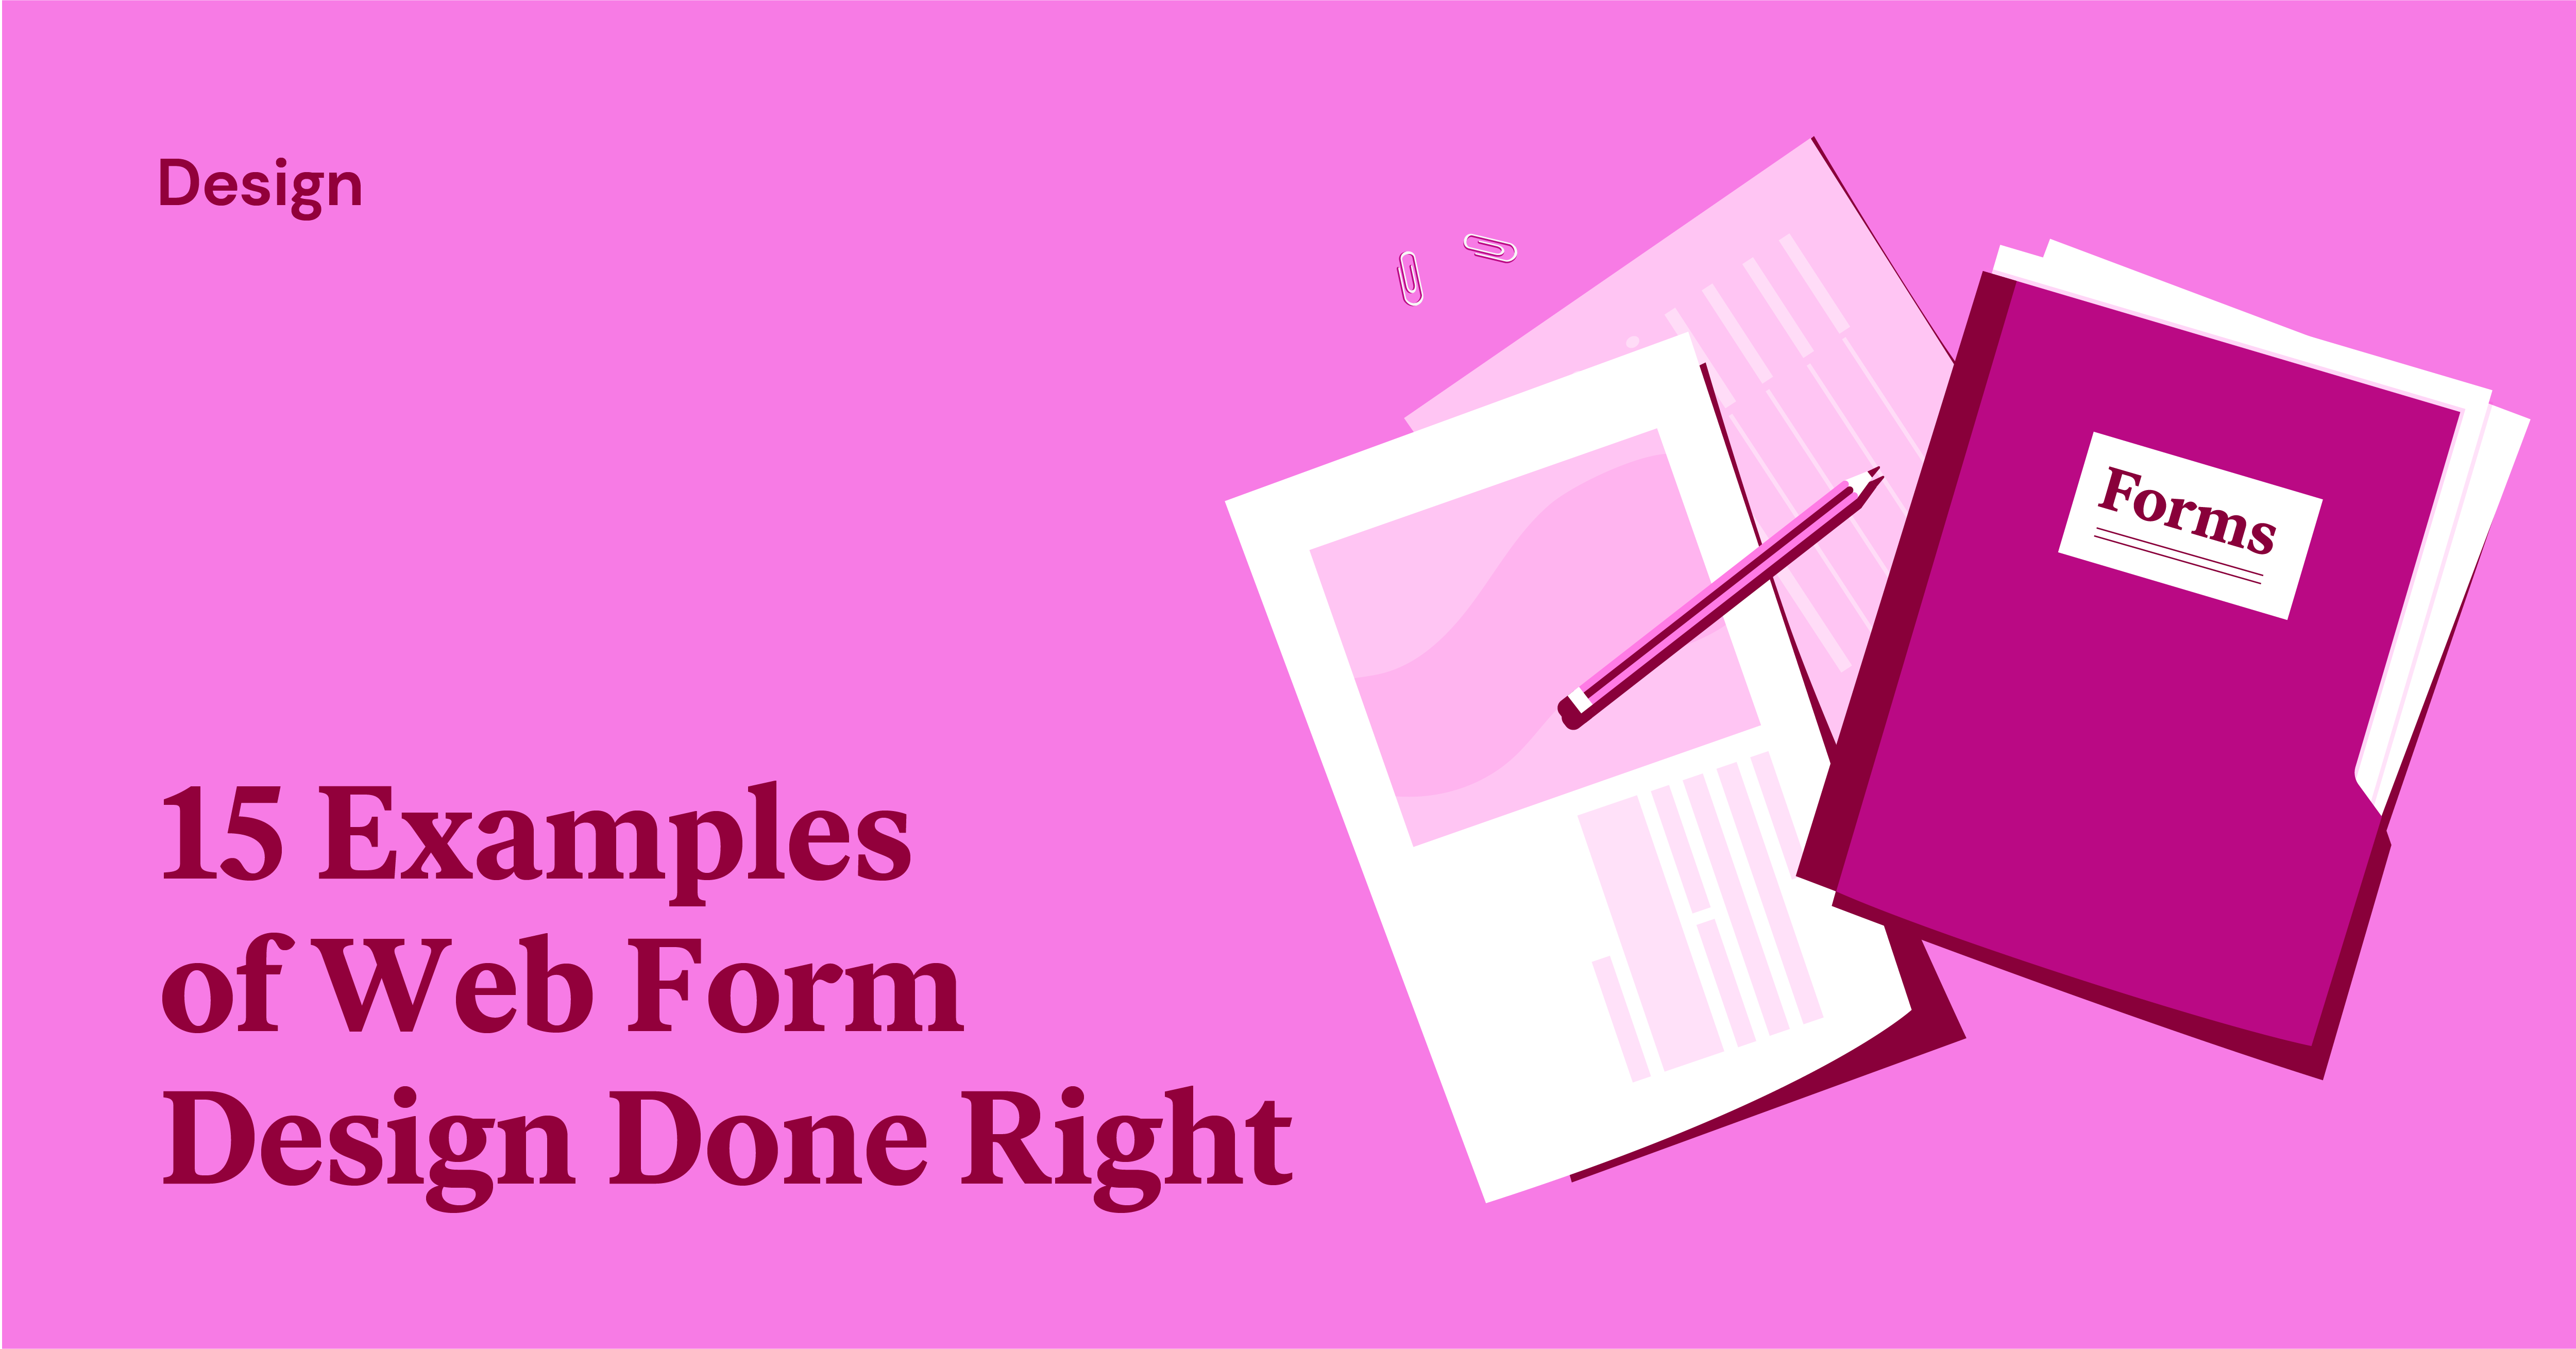 29.04.21 Web Form Design Examples 15 Examples Of Web Form Design Done Right 1200 628 Text 2 